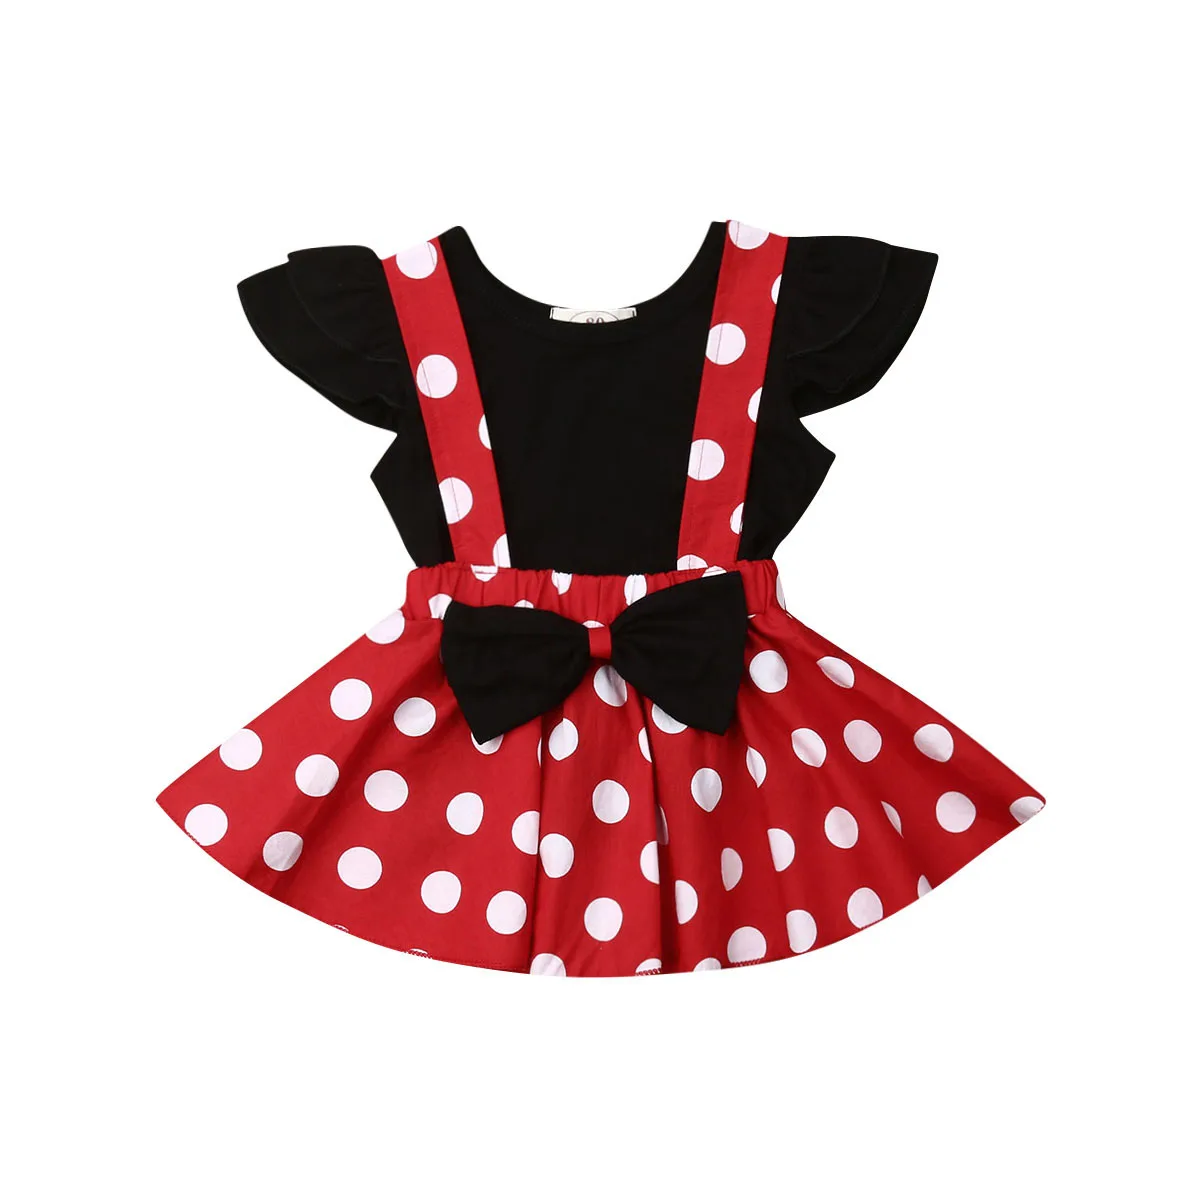 

Baby Girl Clothes Set Black T-Shirt Top Bowknot Polka Dot Suspender Skirt 6M-3T Infant Toddler Summer Casual Outfits 2021 New